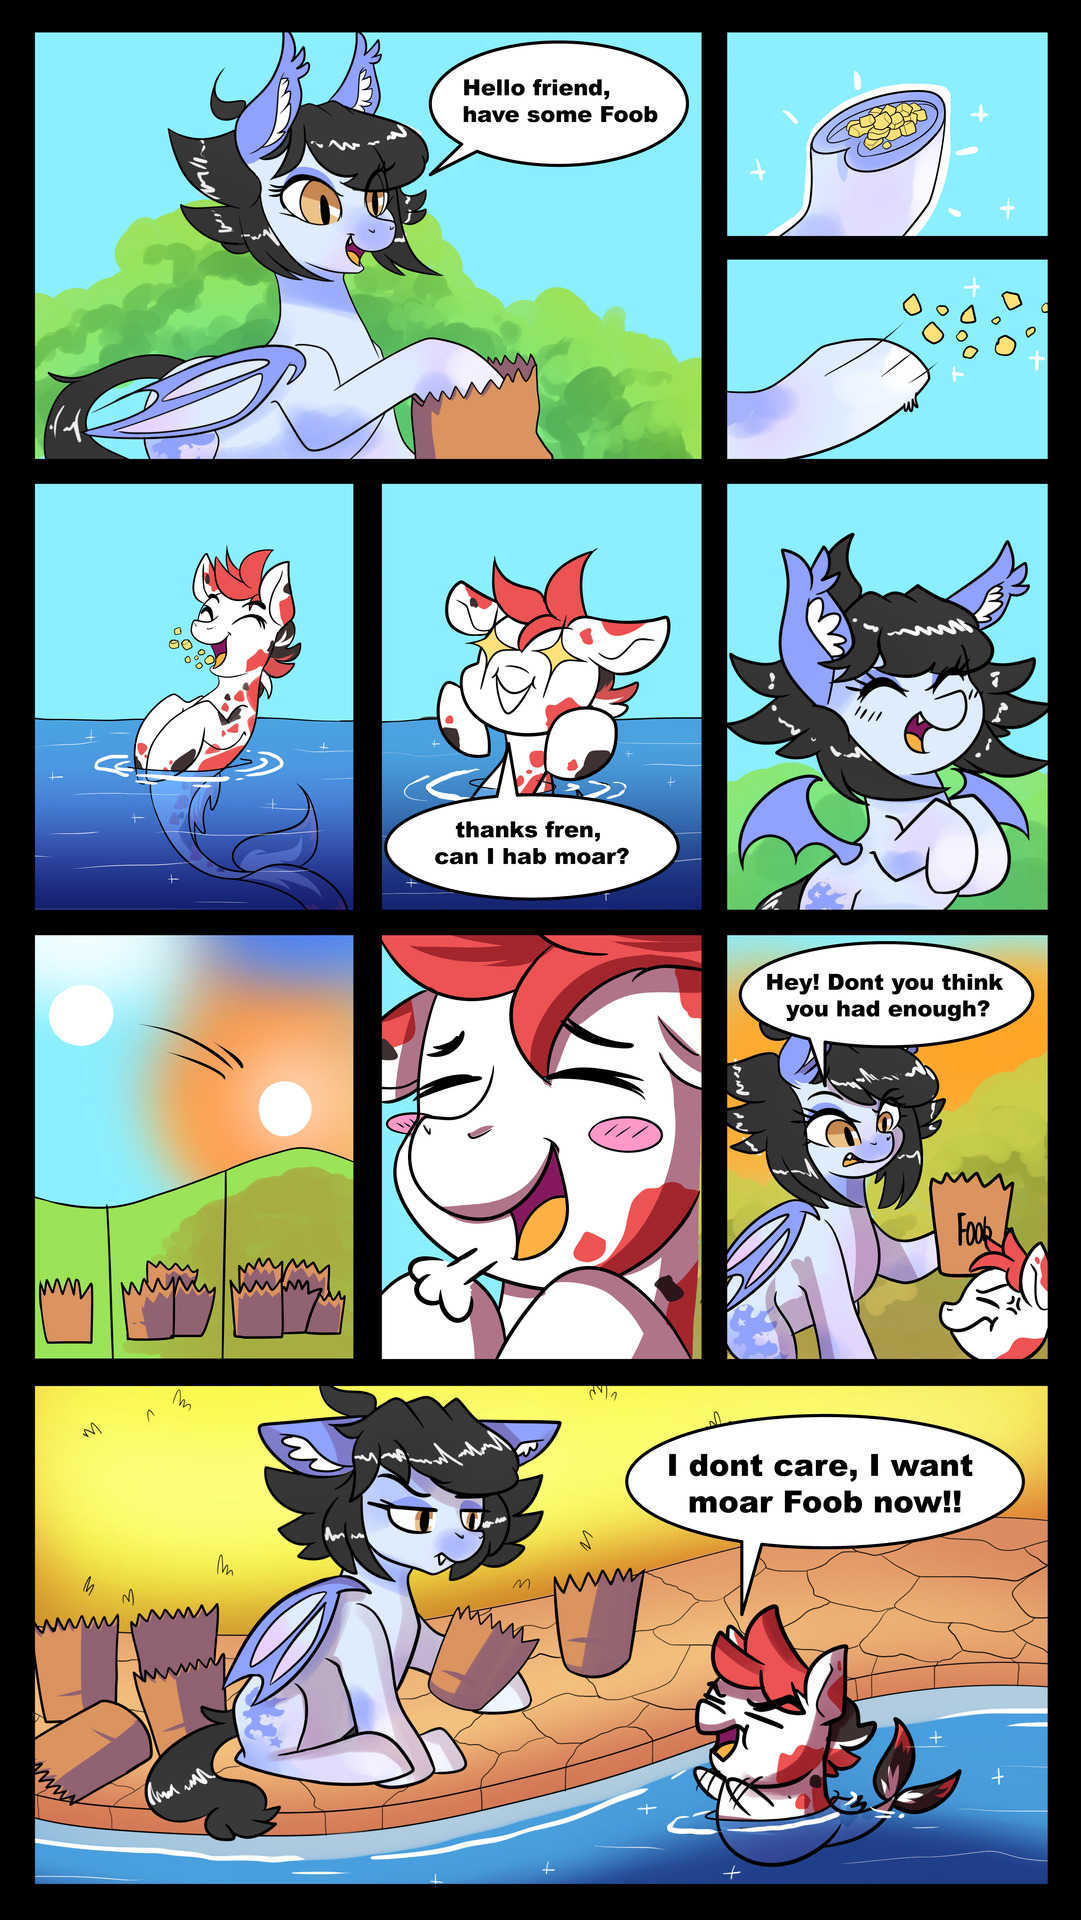 mitzys-stuff: New comic came in ^^ &lt;3  Art by @colorsoundz   x3